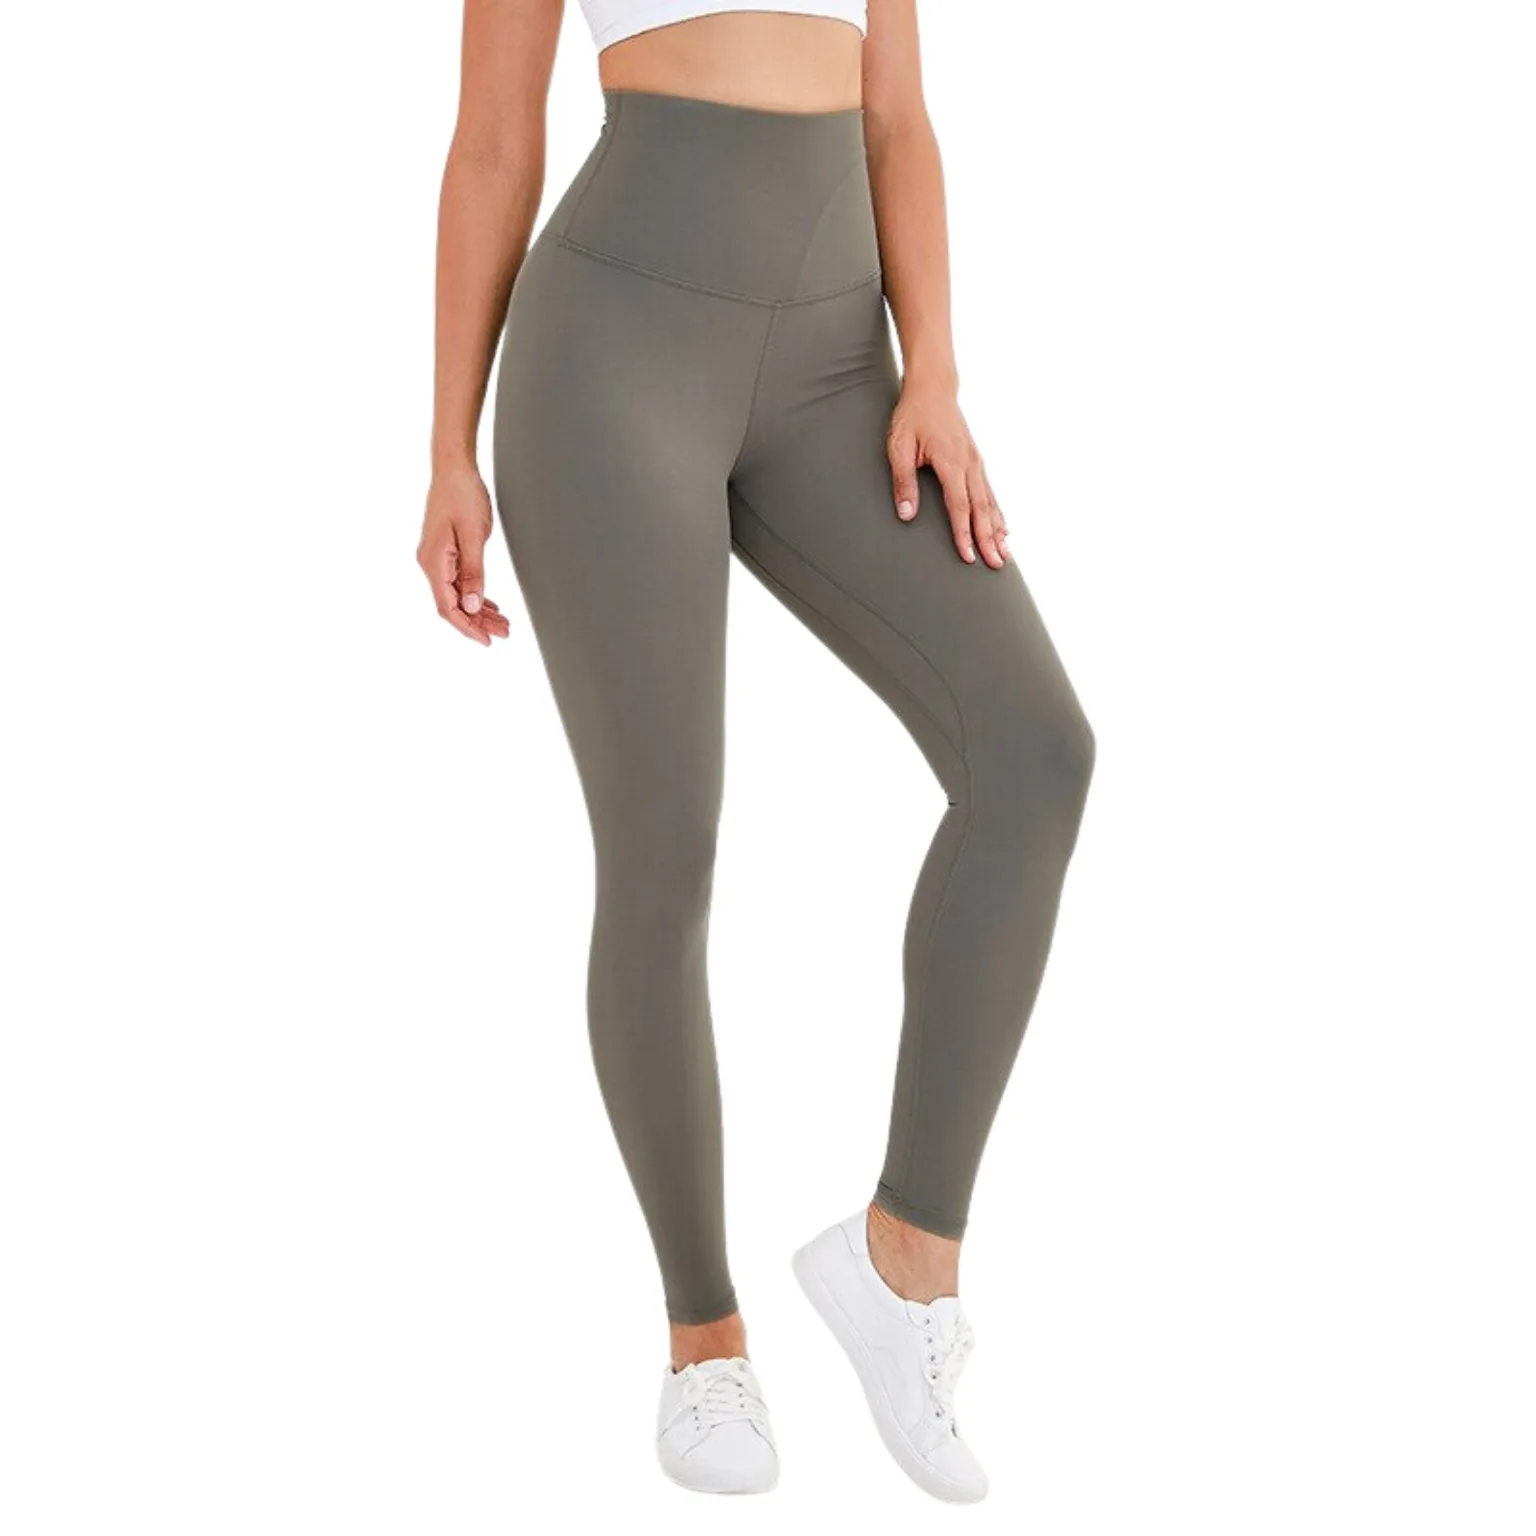 Athletic leggings manufacturing with trendy design